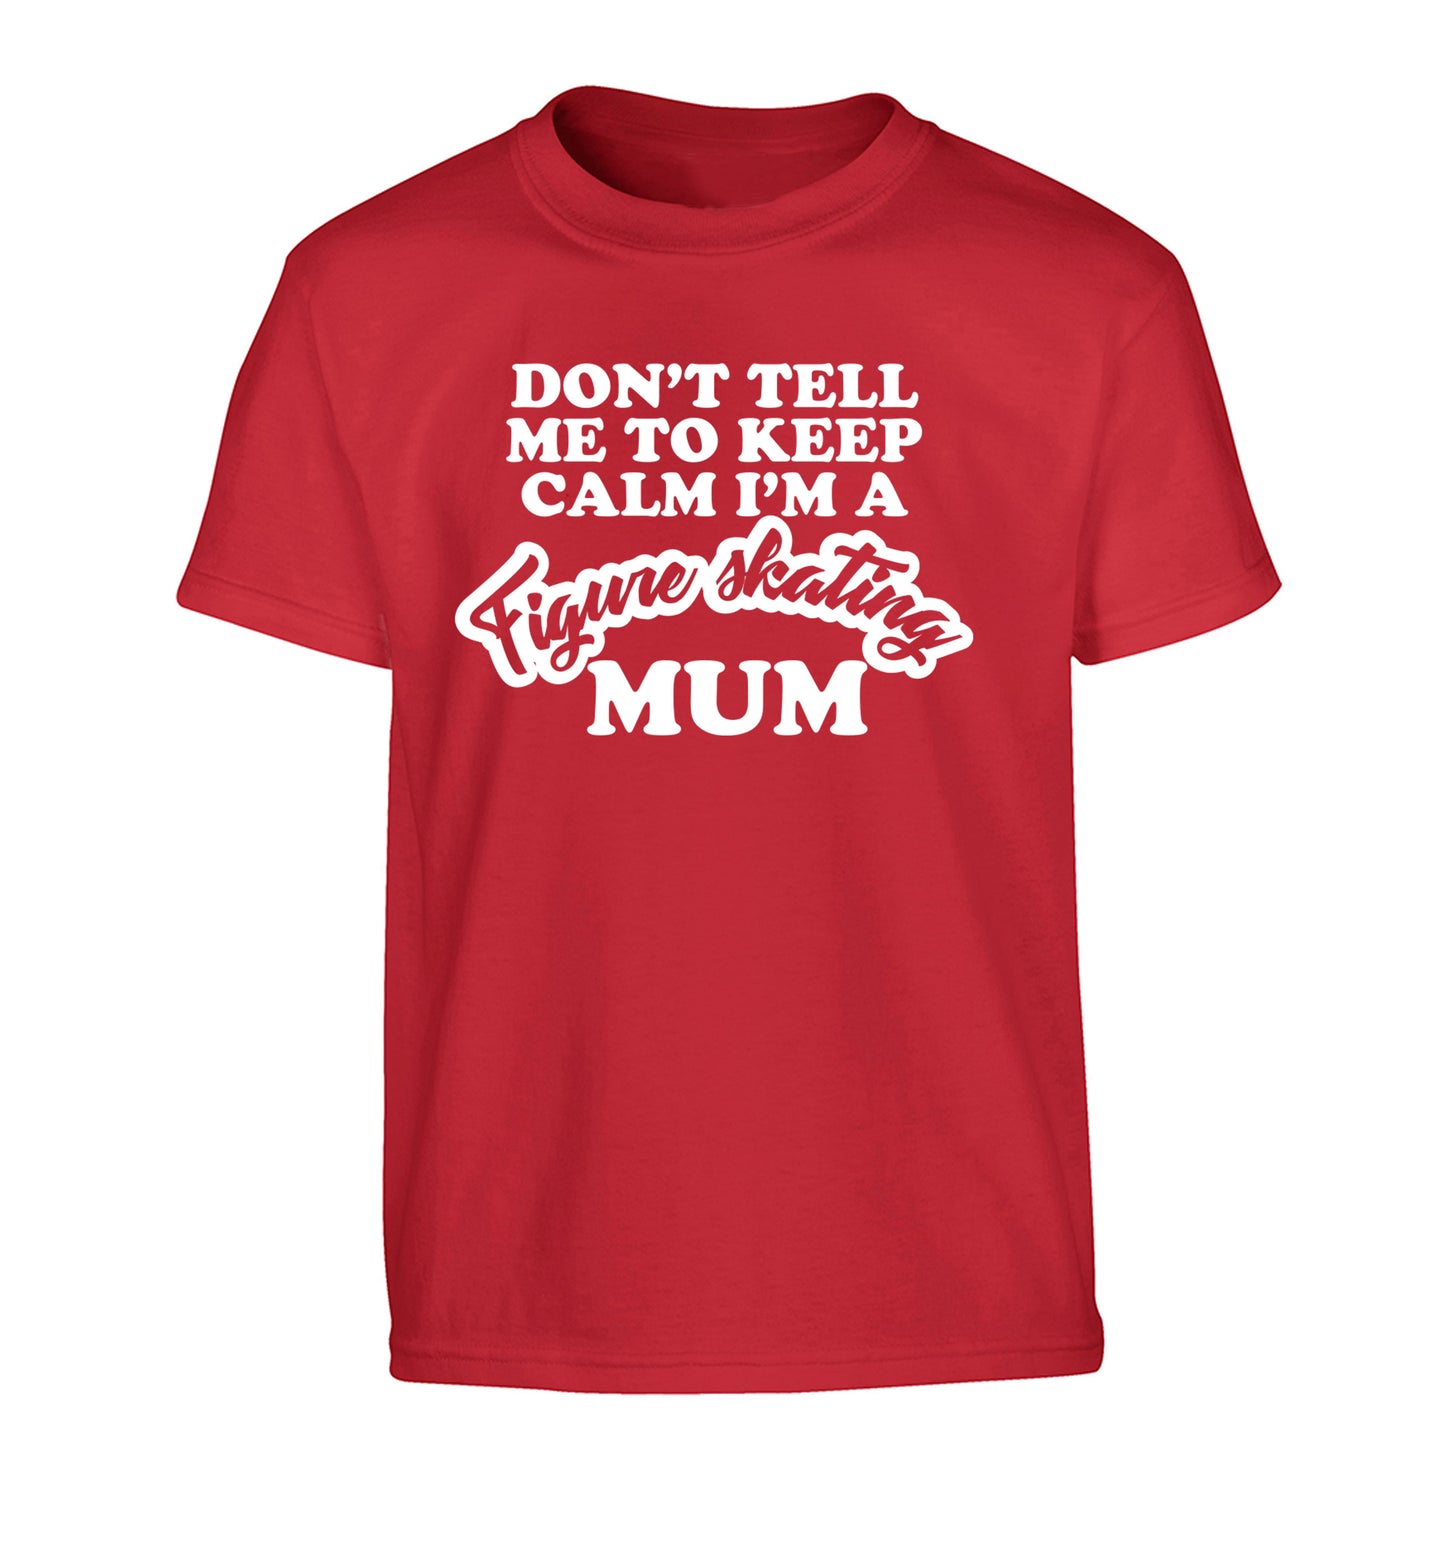 Don't tell me to keep calm I'm a figure skating mum Children's red Tshirt 12-14 Years